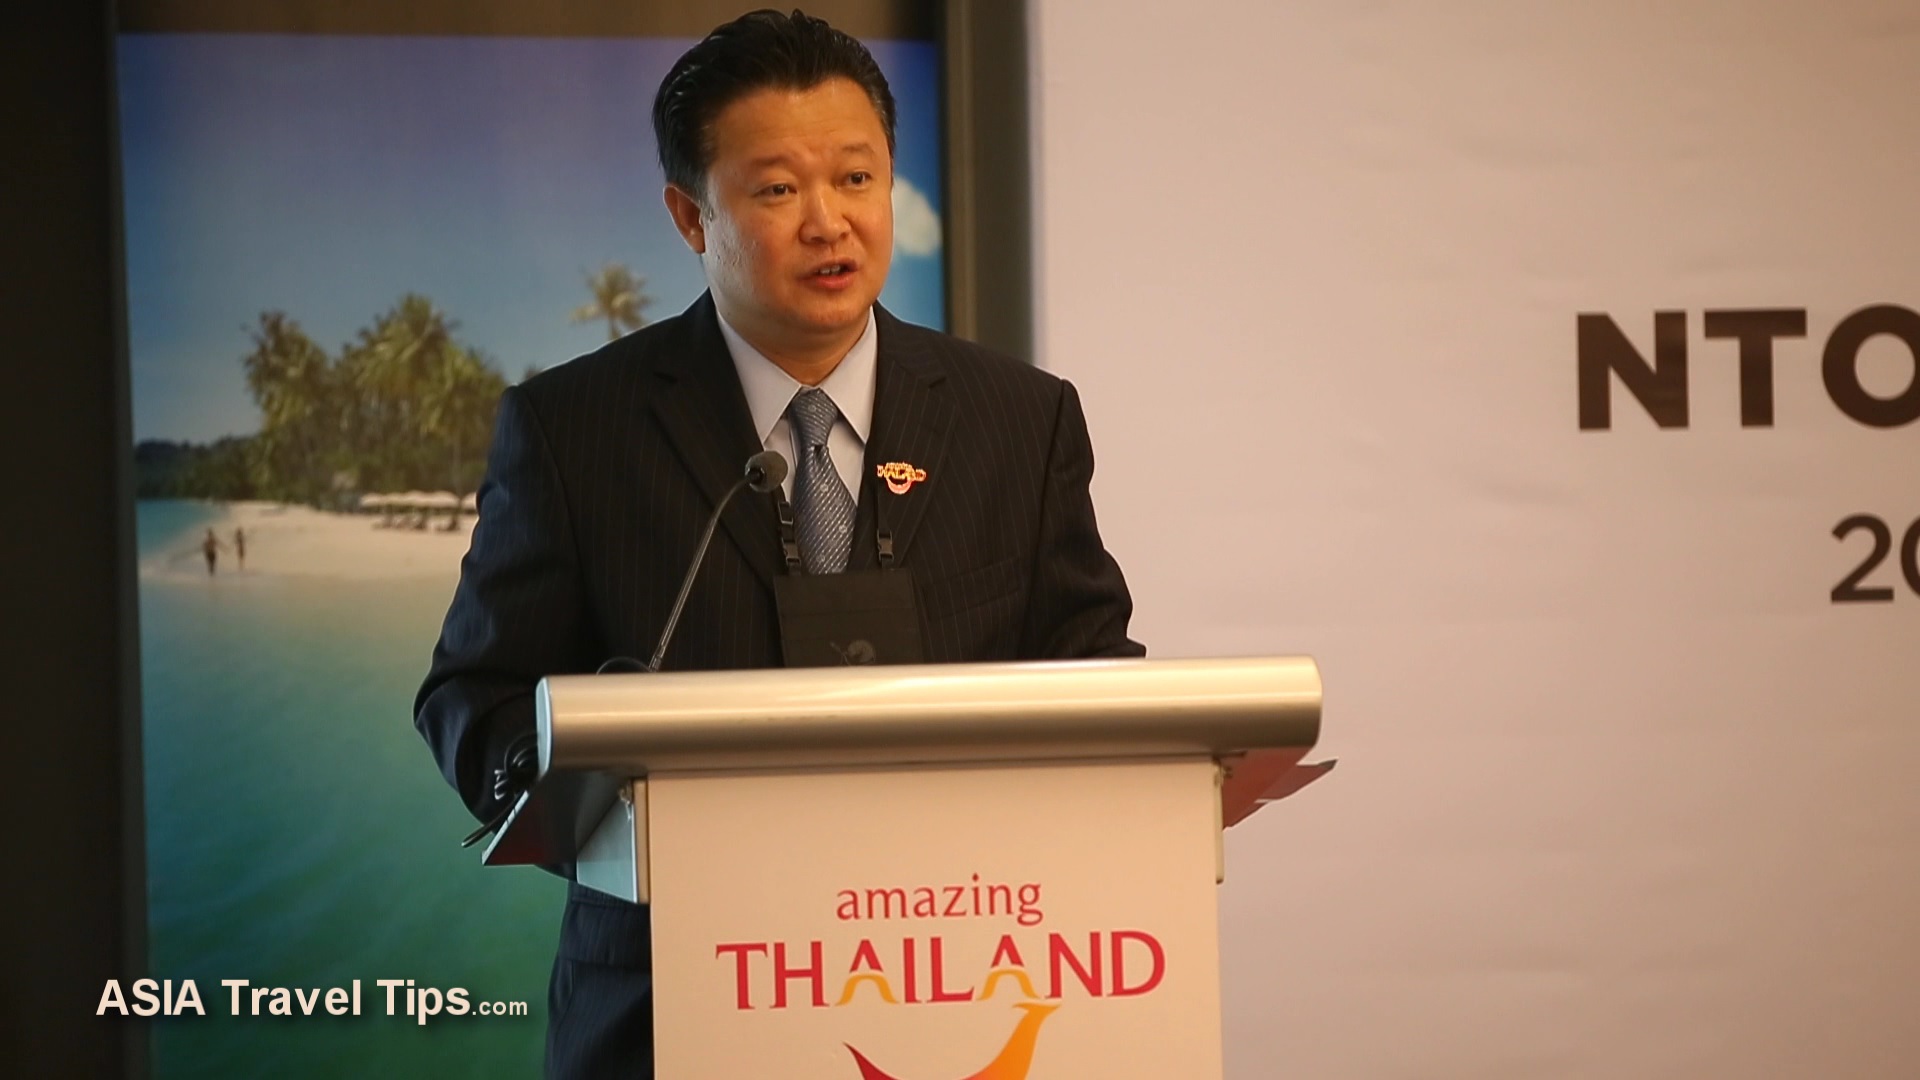 Yuthasak Supasorn, Governor of the Tourism Authority of Thailand, making a presentation at the ASEAN Tourism Forum 2016 in Manila, Philippines. Click to enlarge.